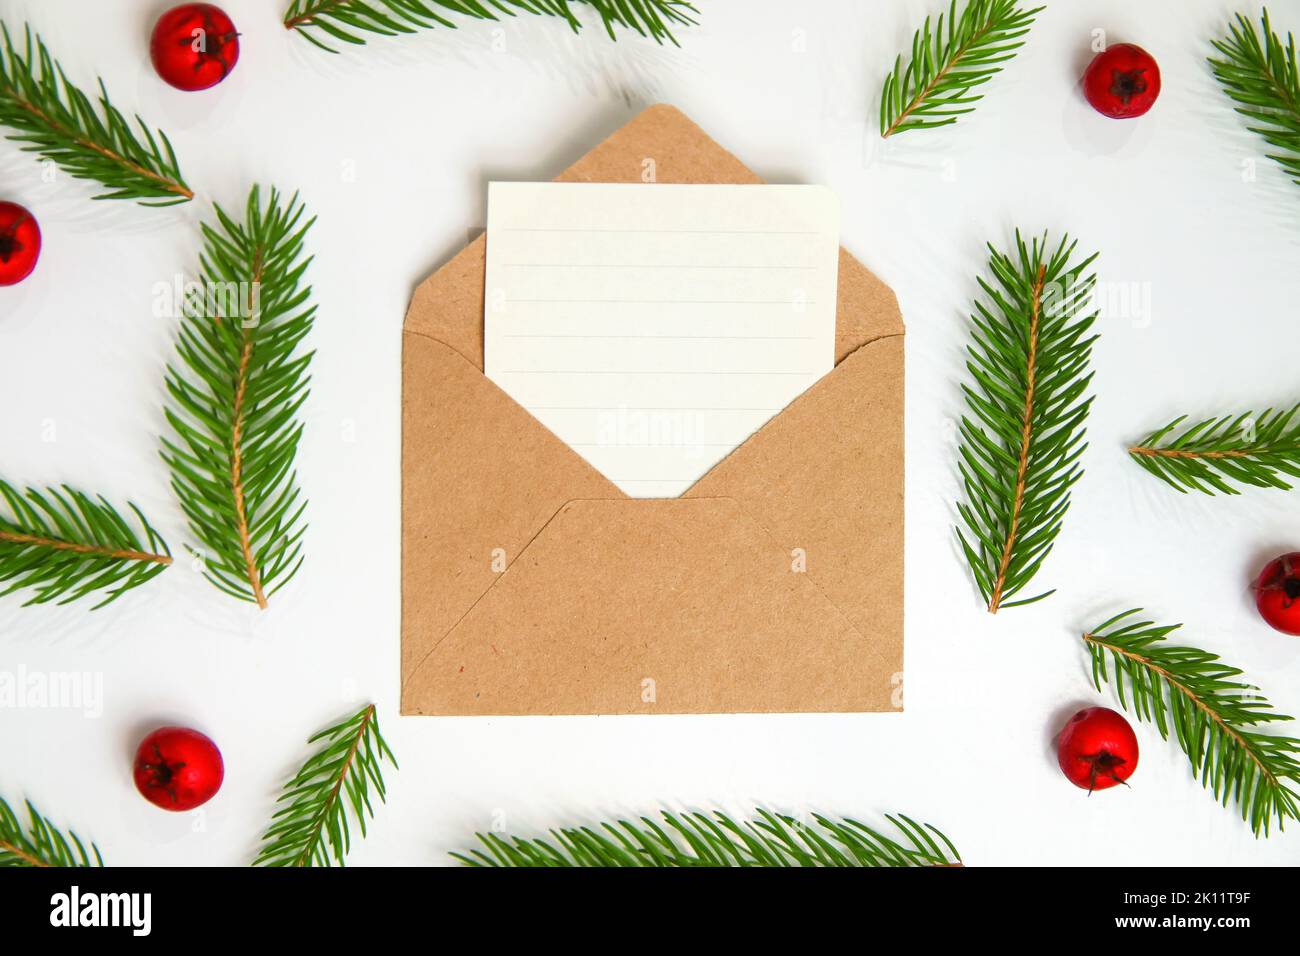 Close-up craft envelope, sheet of paper, letter to Santa. Frame of fir or spruce branch and red berries on white background. Christmas greeting card Stock Photo